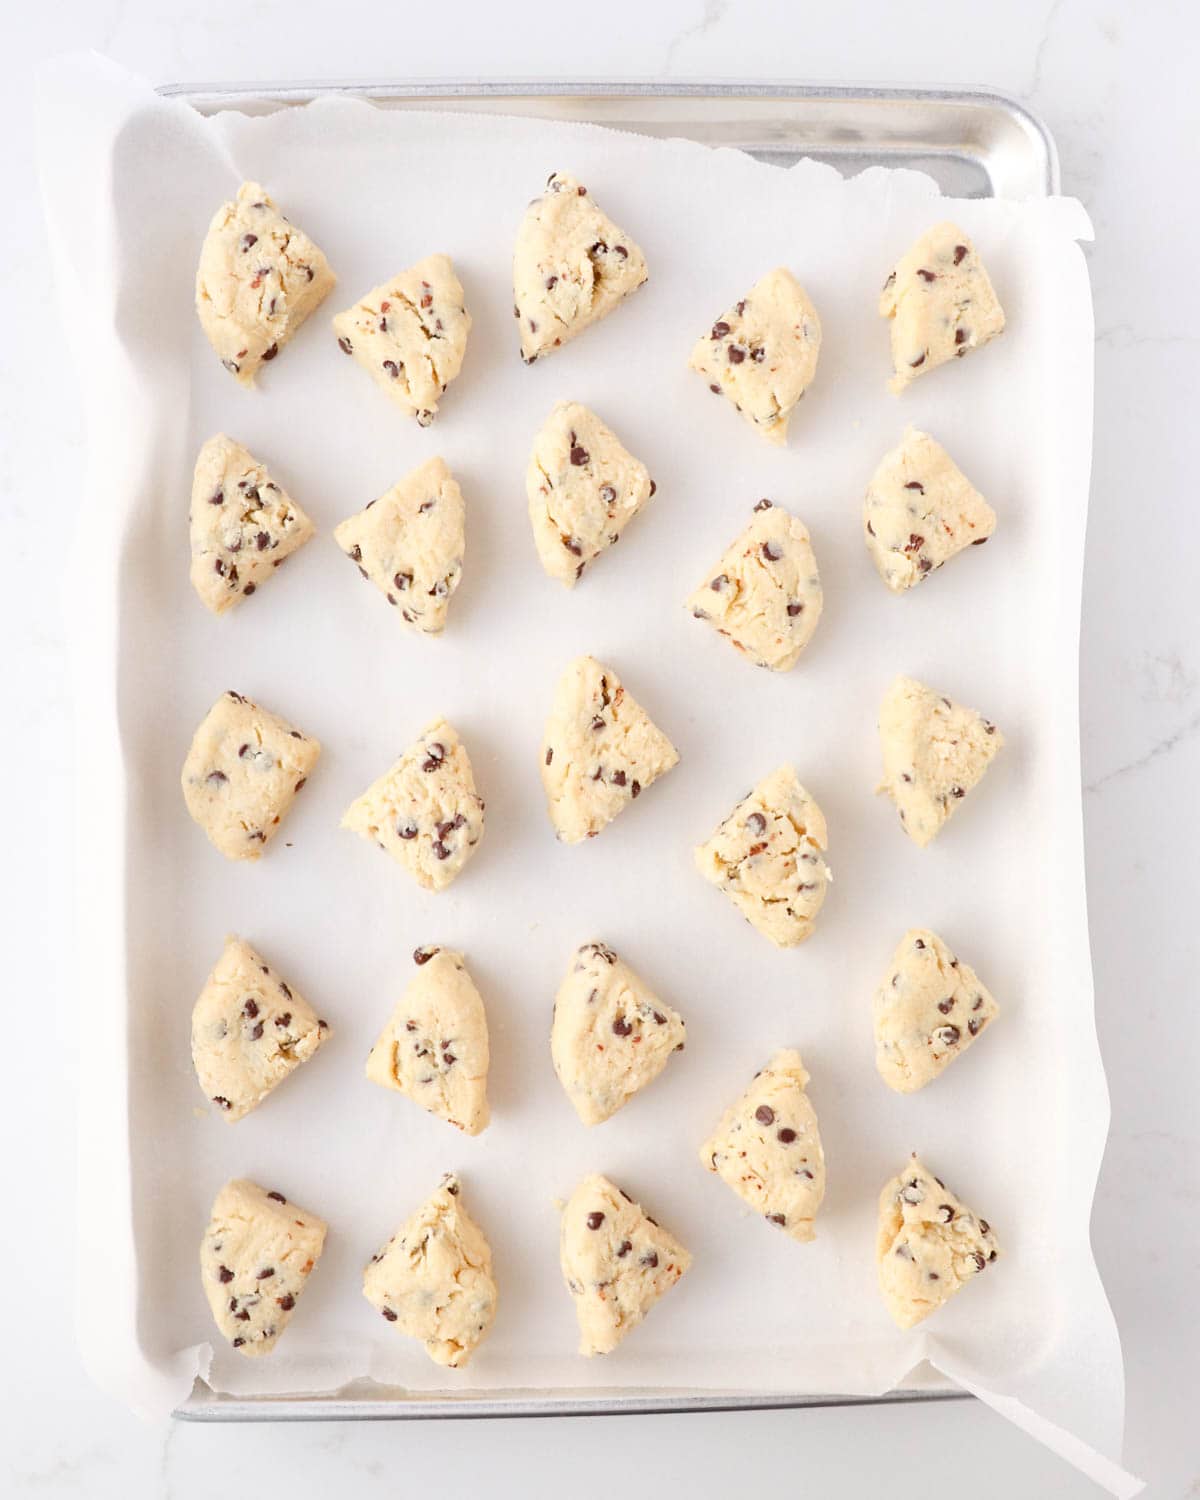 24 unbaked mini scones on a baking sheet lined with parchment paper.